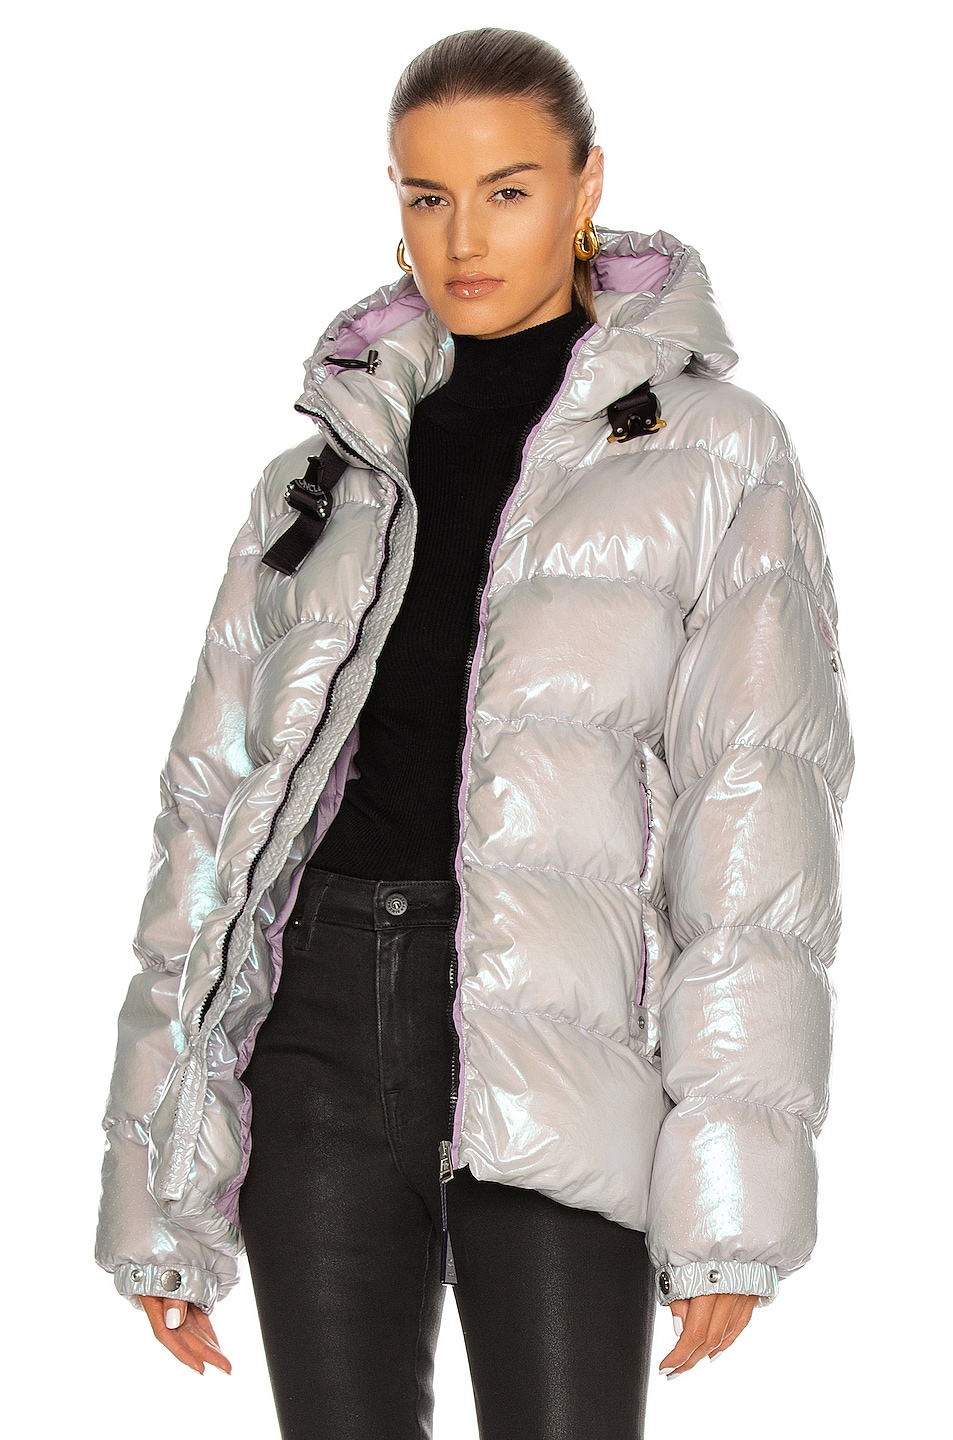 Moncler Genius Moncler Alyx Chamoisee Jacket in Iridescent | FWRD